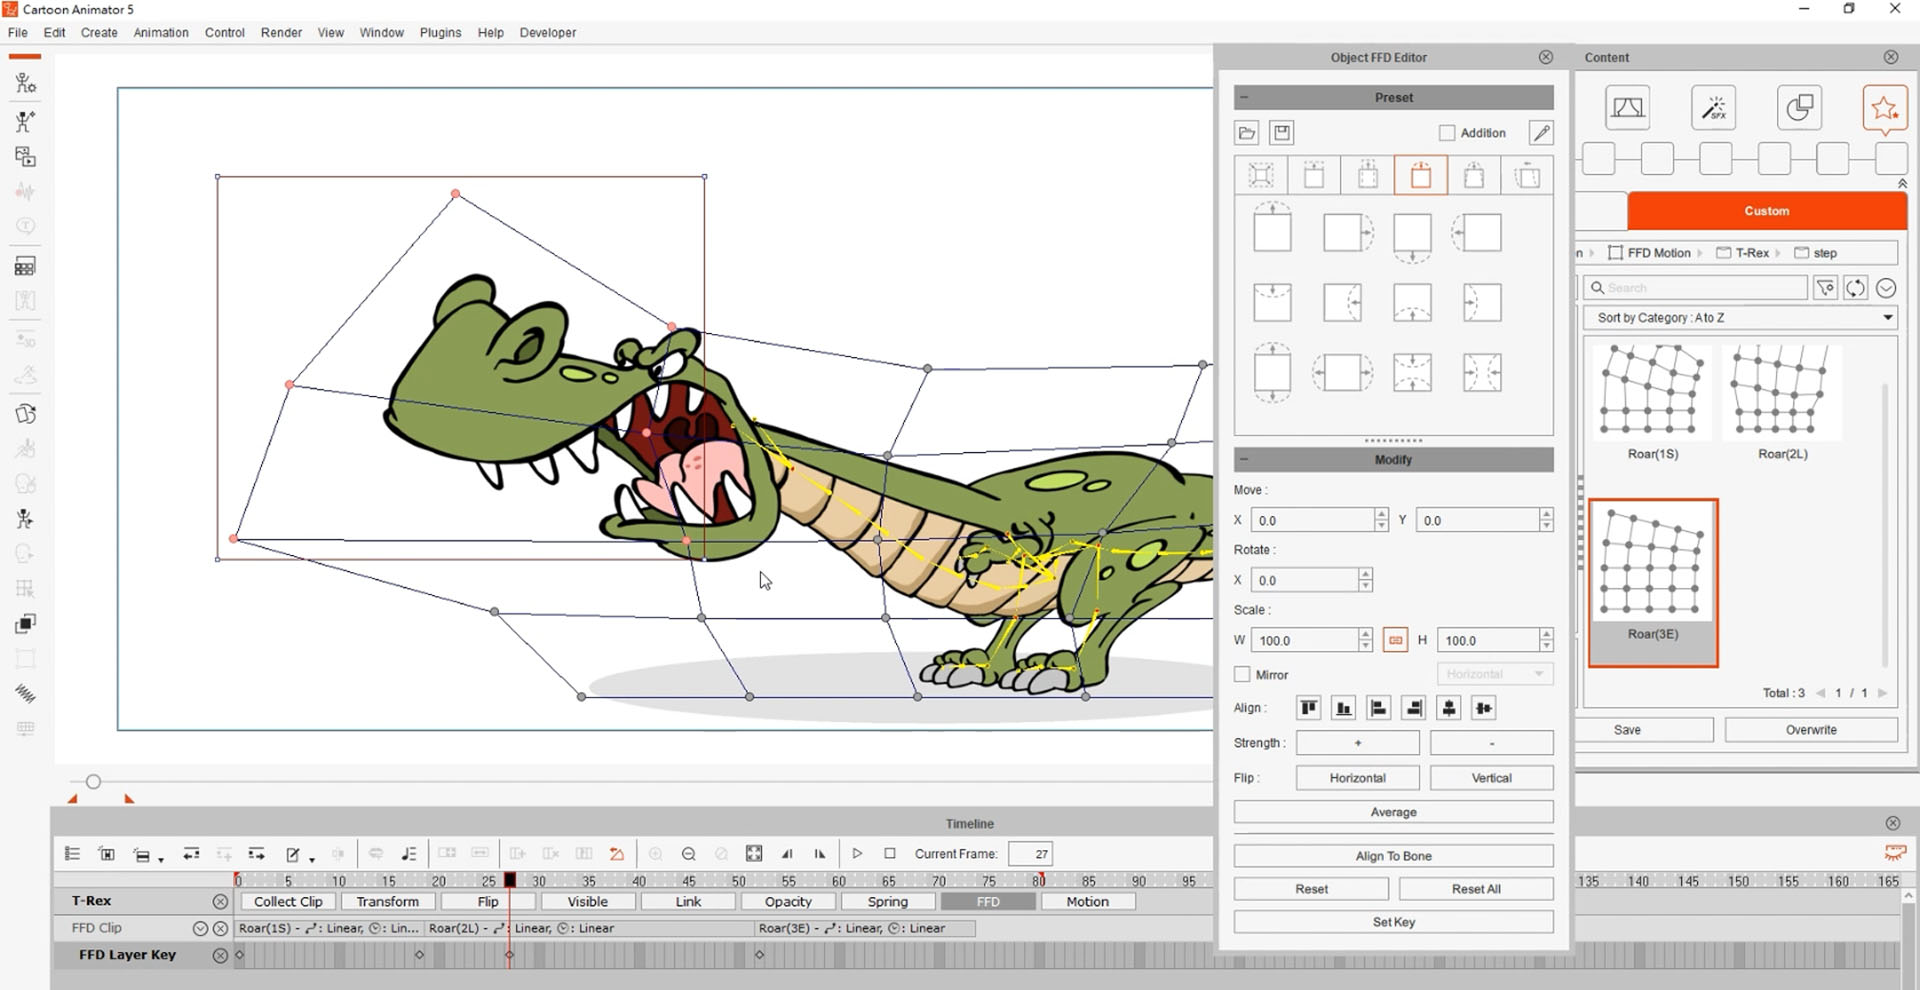 Working with Reallusion Cartoon Animator 5.22.2329.1 full license